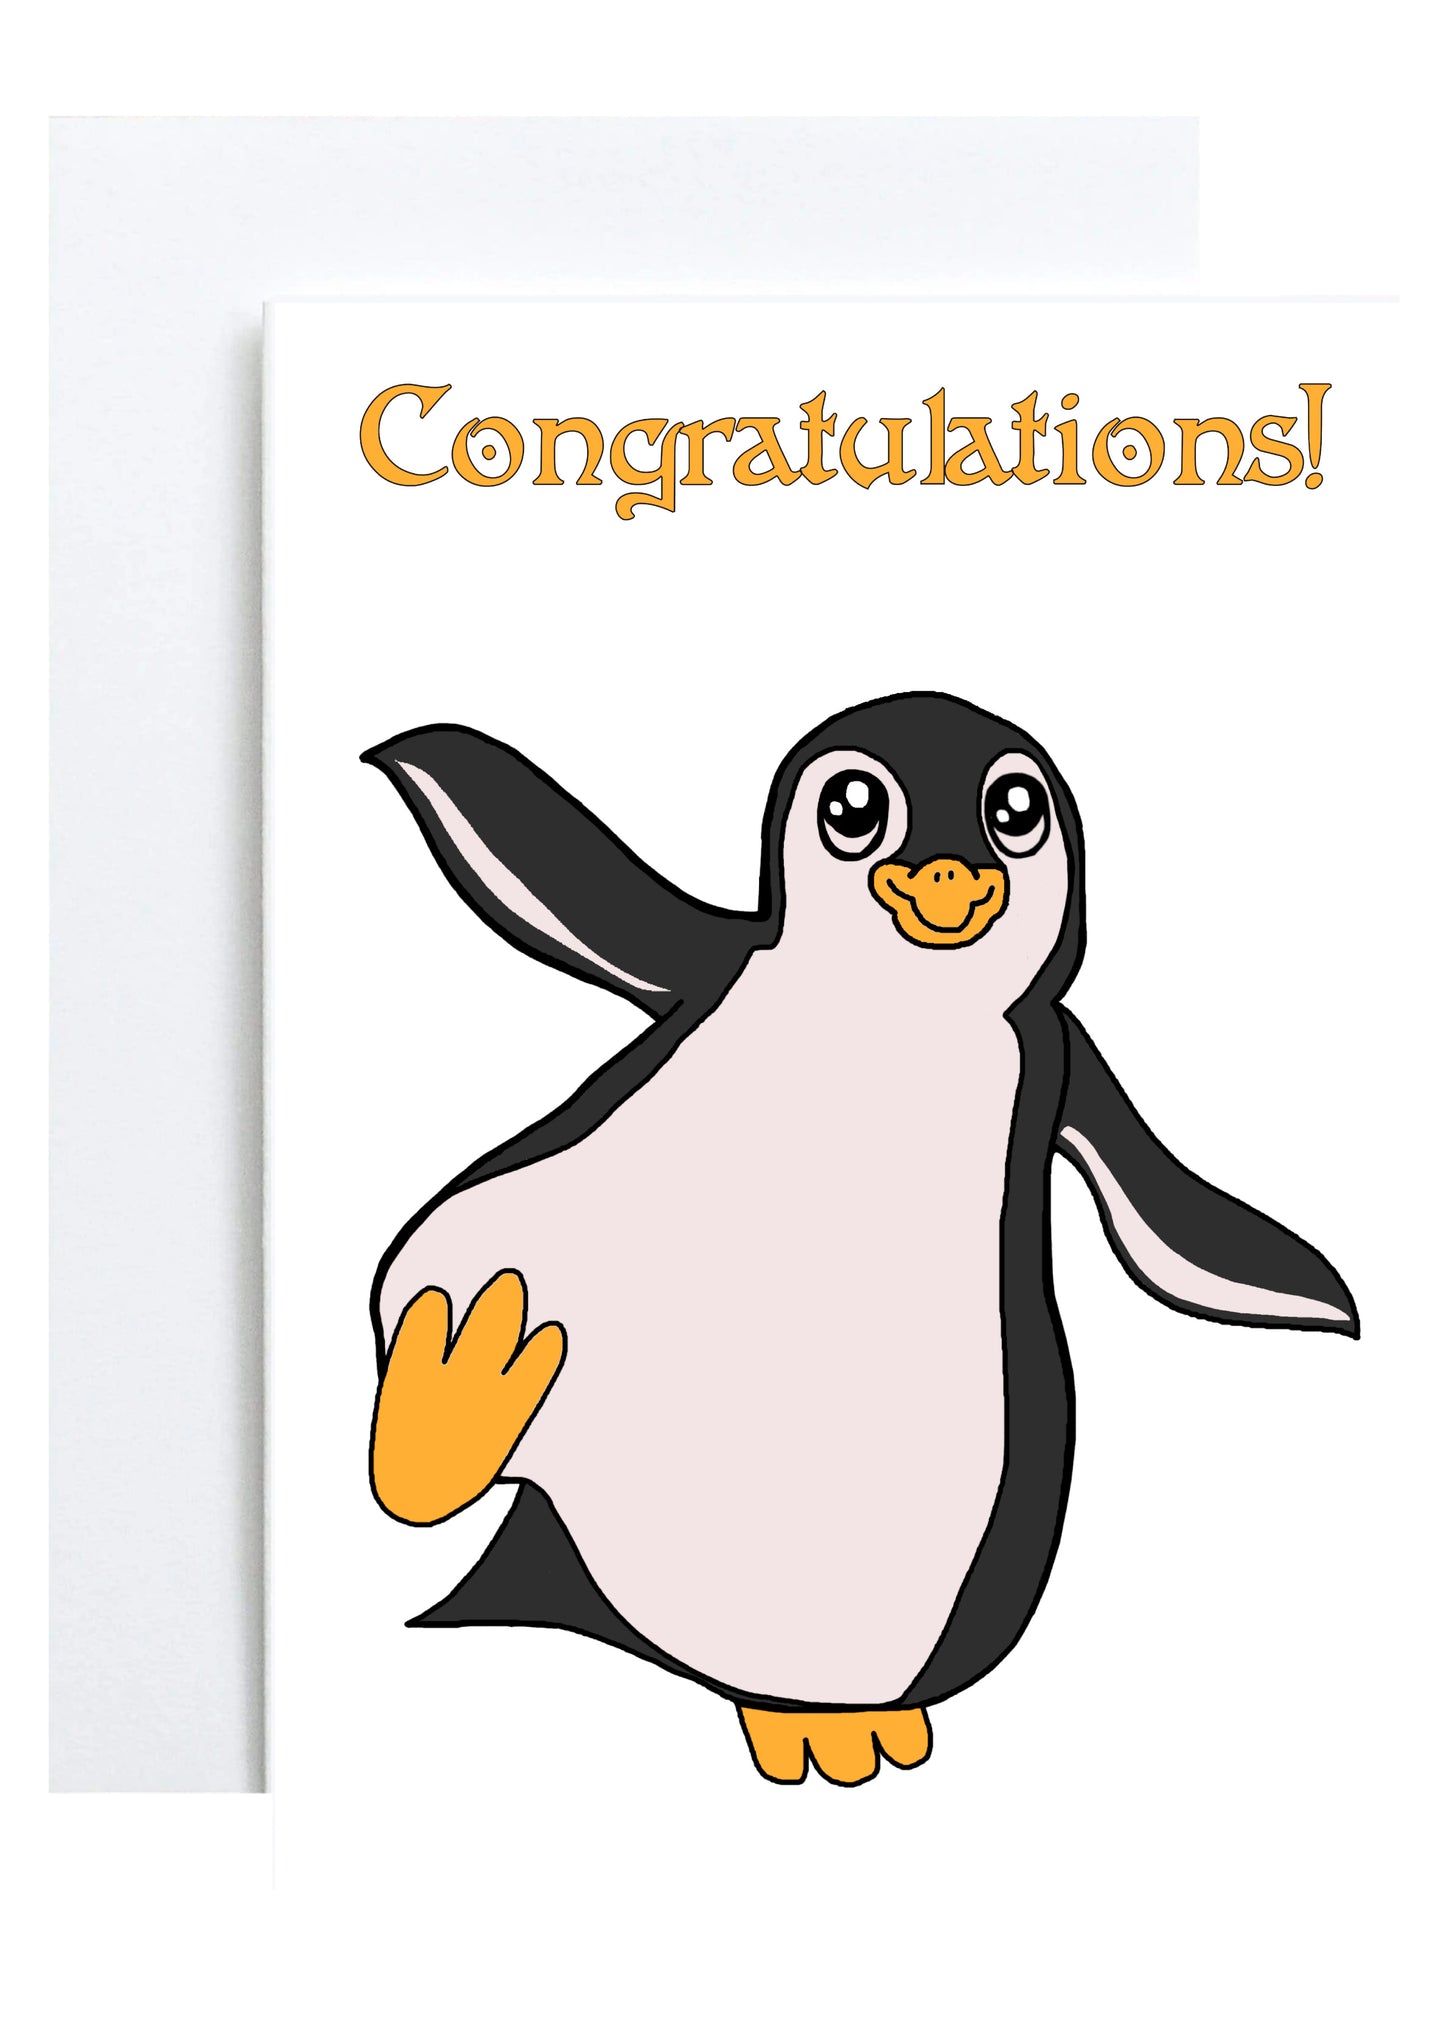 "So Flippin' Happy for You!" Greeting Card (Congratulations)